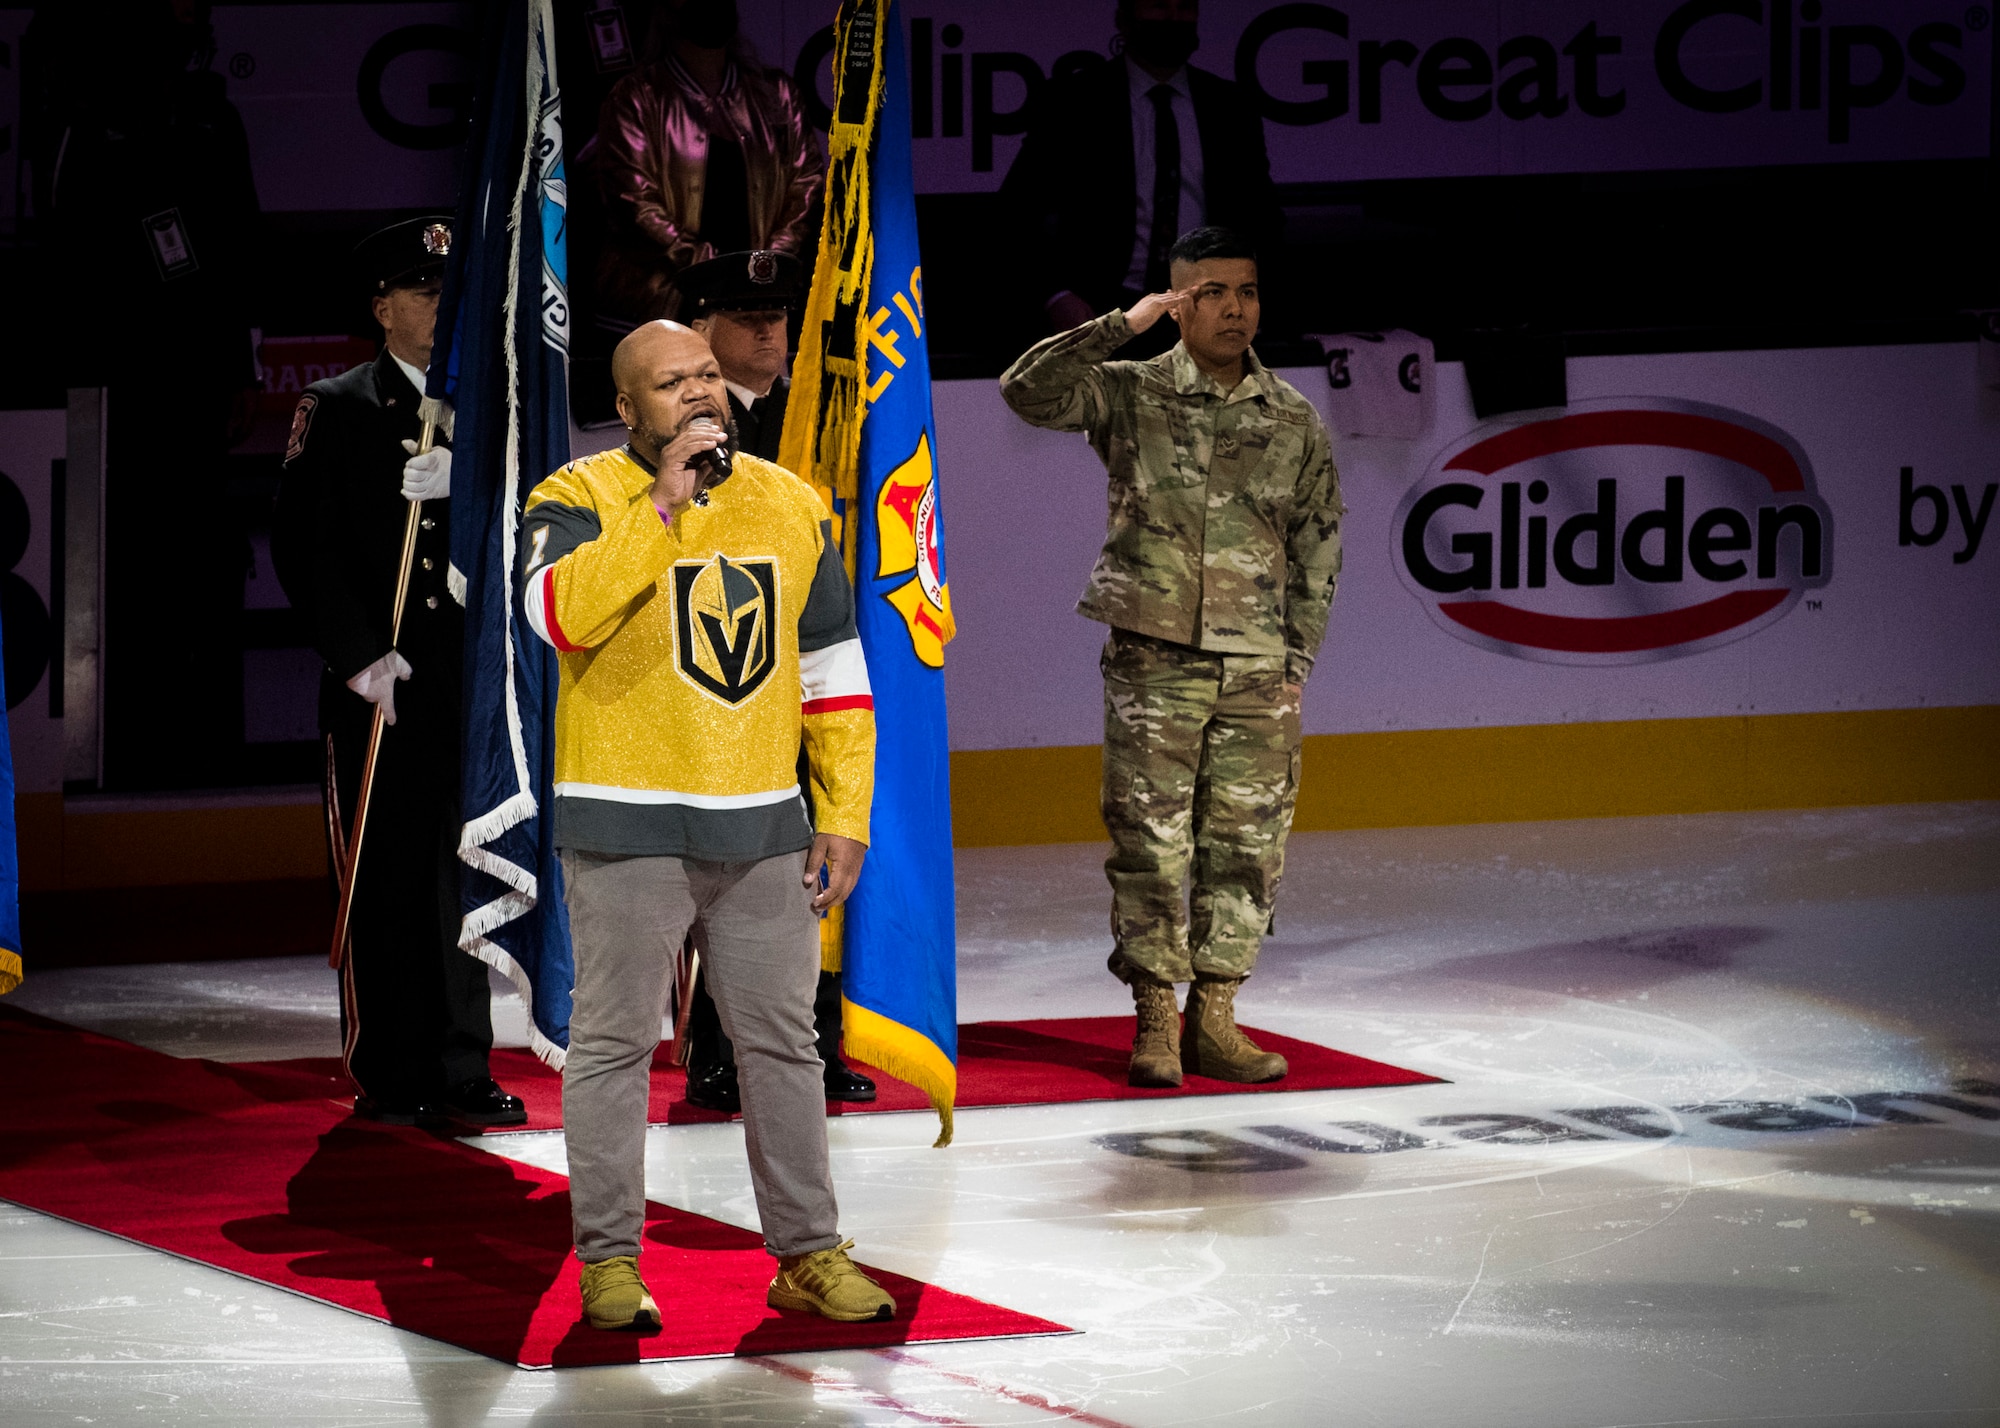 Senior Airman Fernando Cruz, 926th Wing reservist, renders a salute during the National Anthem at the National Hockey League All Stars game, Feb. 4, 2022, at T-Mobile Arena in Las Vegas, Nev. The NHL All Stars game was hosted in Las Vegas and hosts some of the most talented players in a friendly exhibition game. (U.S. Air Force photo by Senior Airman Brett Clashman)